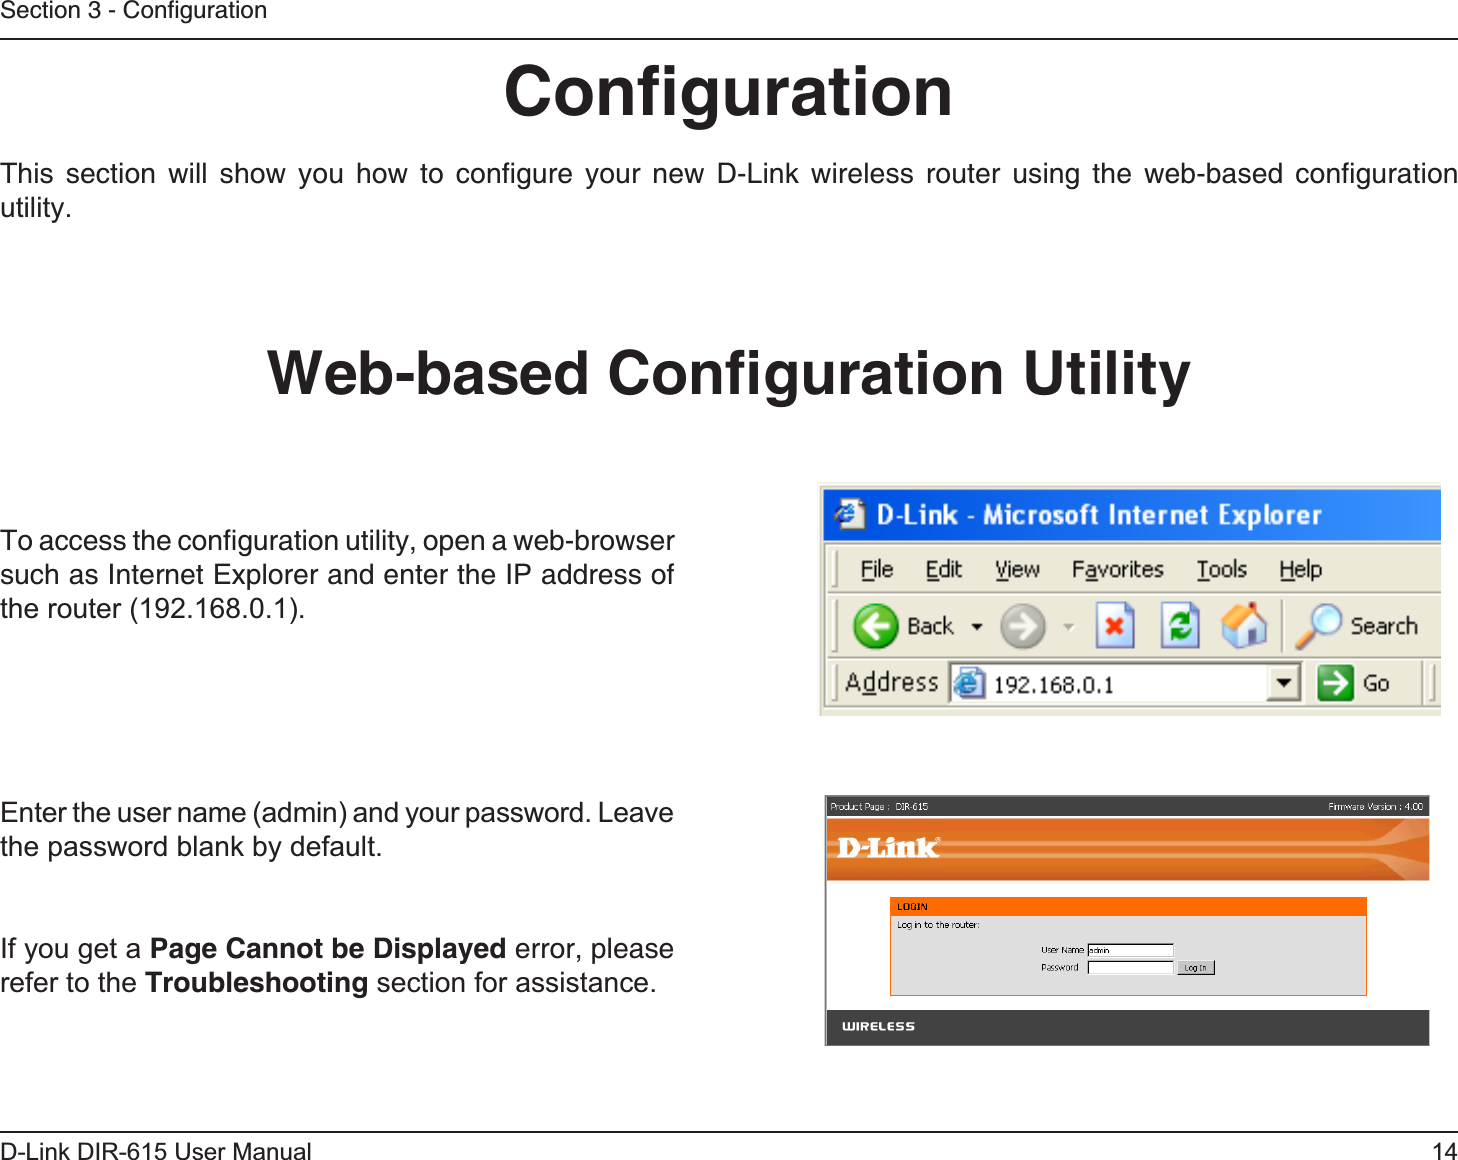 14D-Link DIR-615 User ManualSection 3 - ConﬁgurationConﬁgurationThis section will show you how to conﬁgure your new D-Link wireless router using the web-based conﬁguration utility.Web-based Conﬁguration UtilityTo access the conﬁguration utility, open a web-browser such as Internet Explorer and enter the IP address of the router (192.168.0.1).Enter the user name (admin) and your password. Leave the password blank by default.If you get a Page Cannot be Displayed error, please refer to the Troubleshooting section for assistance.